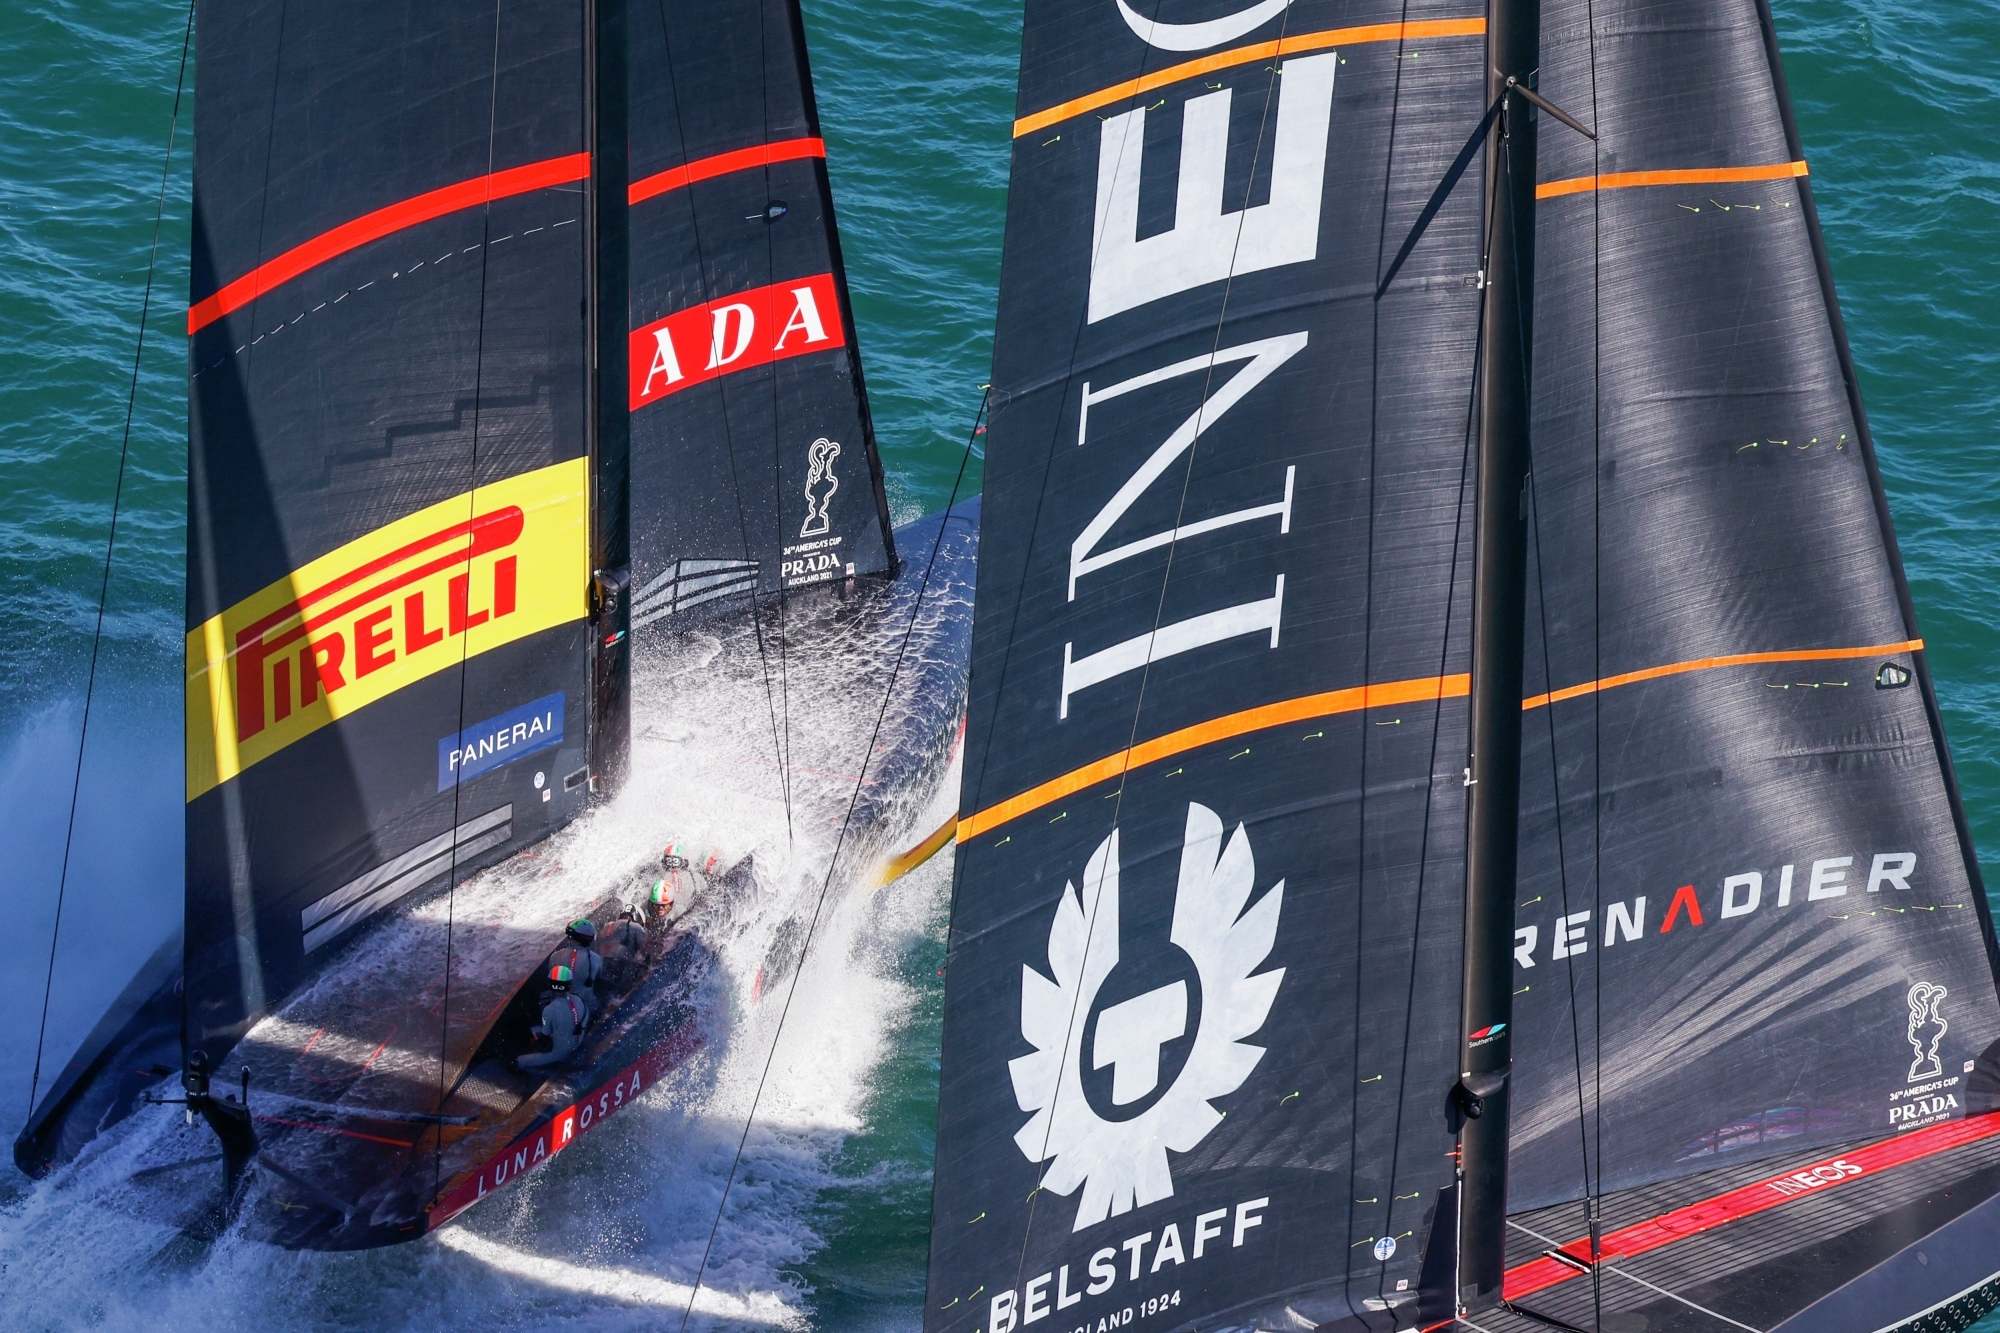  Prada Cup  Auckland NZL  Final  Races 5 + 6  First victory for INEOS